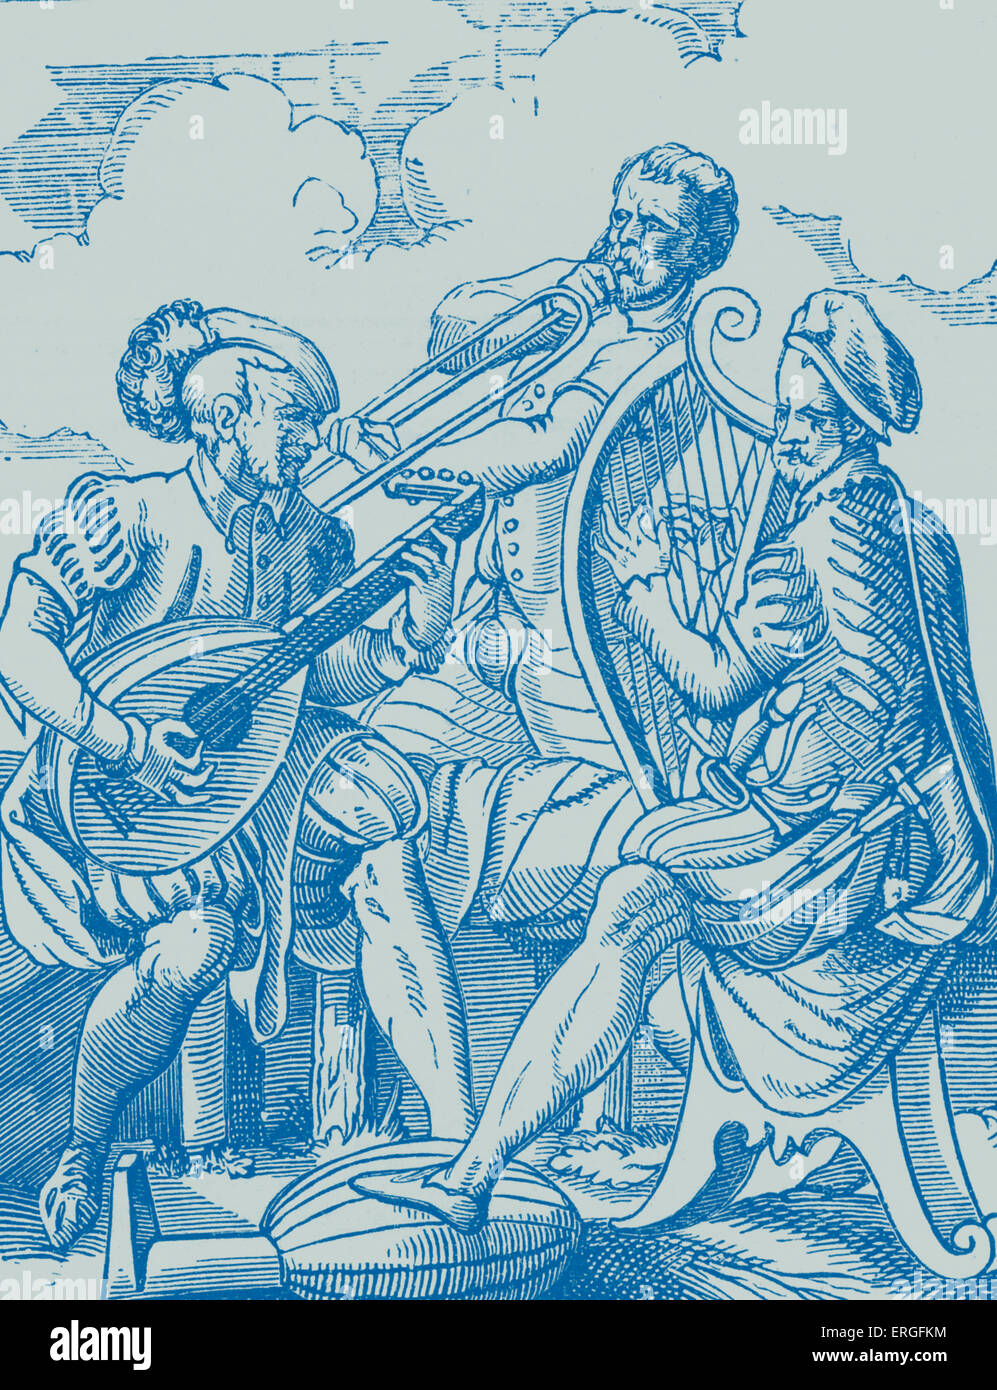 German Musicians playing Lute and Guitar - from engraving by J Amman, 16th century. Stock Photo